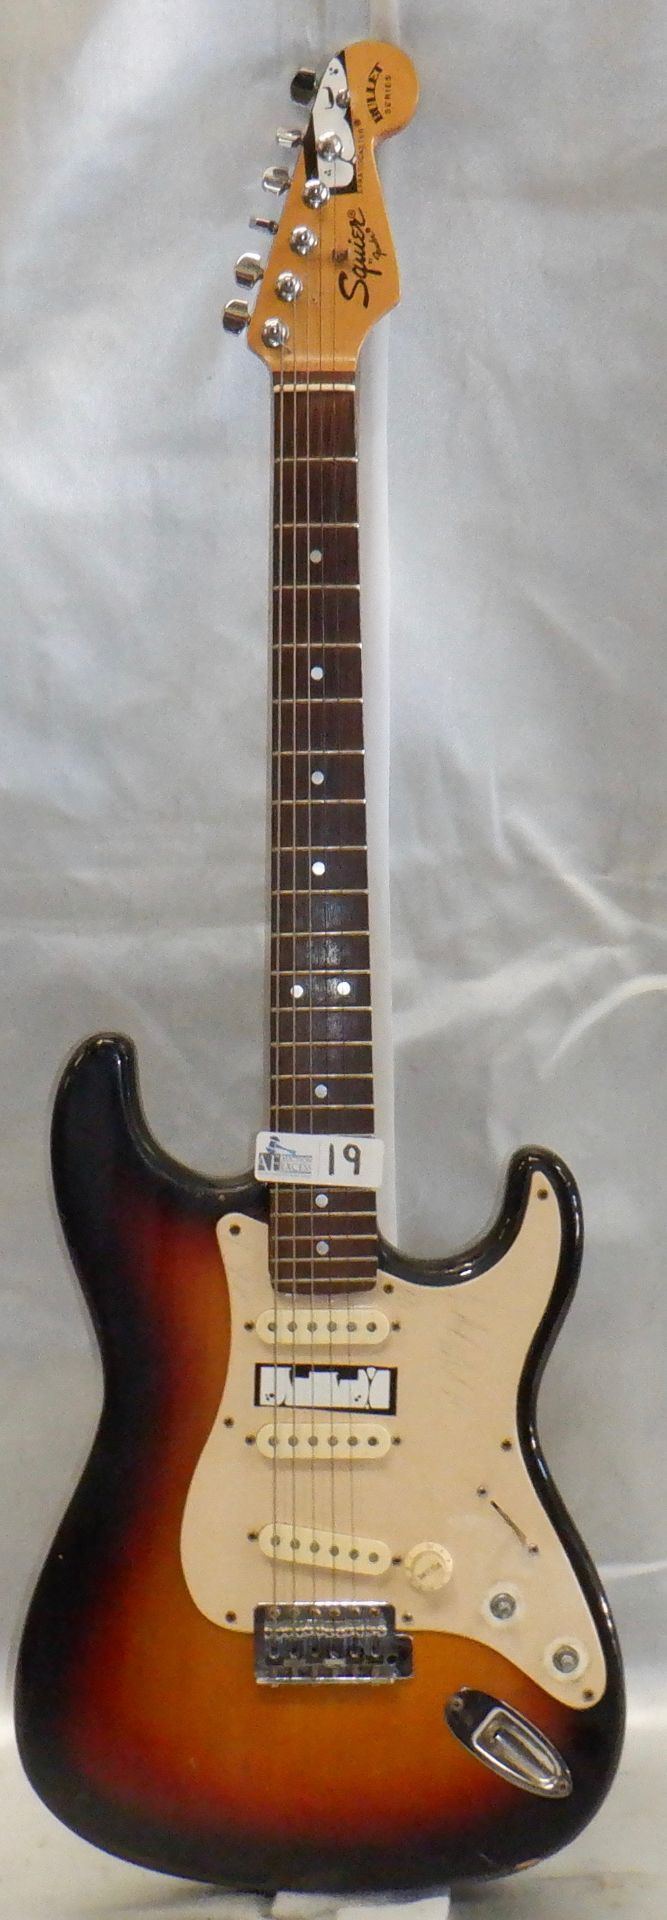 SQUIRE BY FENDER STRATOCASTER BULLET SERIES GUITAR WITH CASE - Image 2 of 6